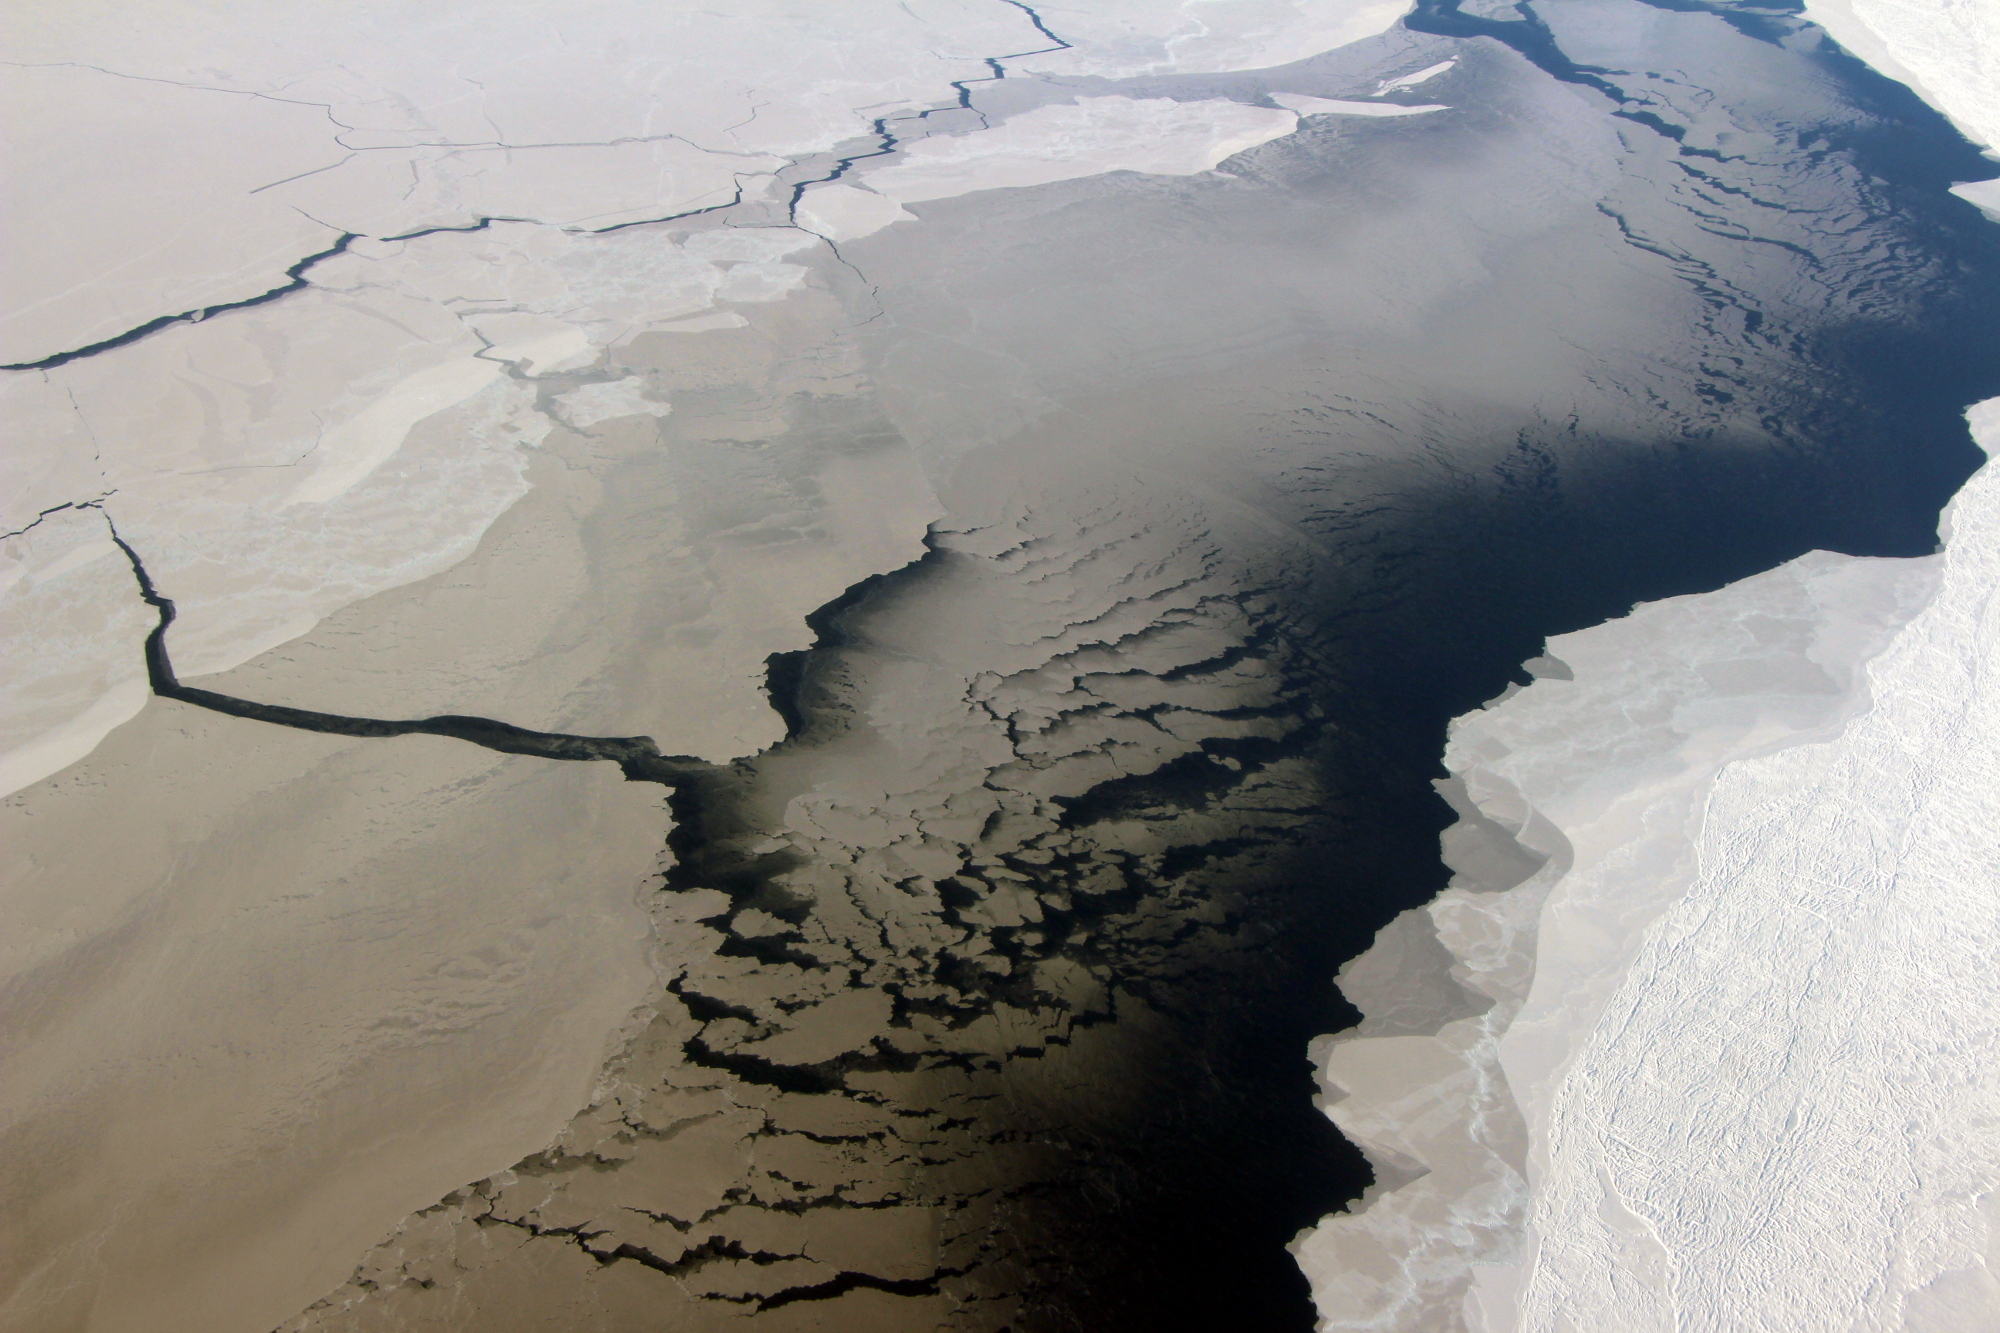 coastal polynya, or opening in the sea ice cover, near the Filchner Ice Shelf in Antarctica